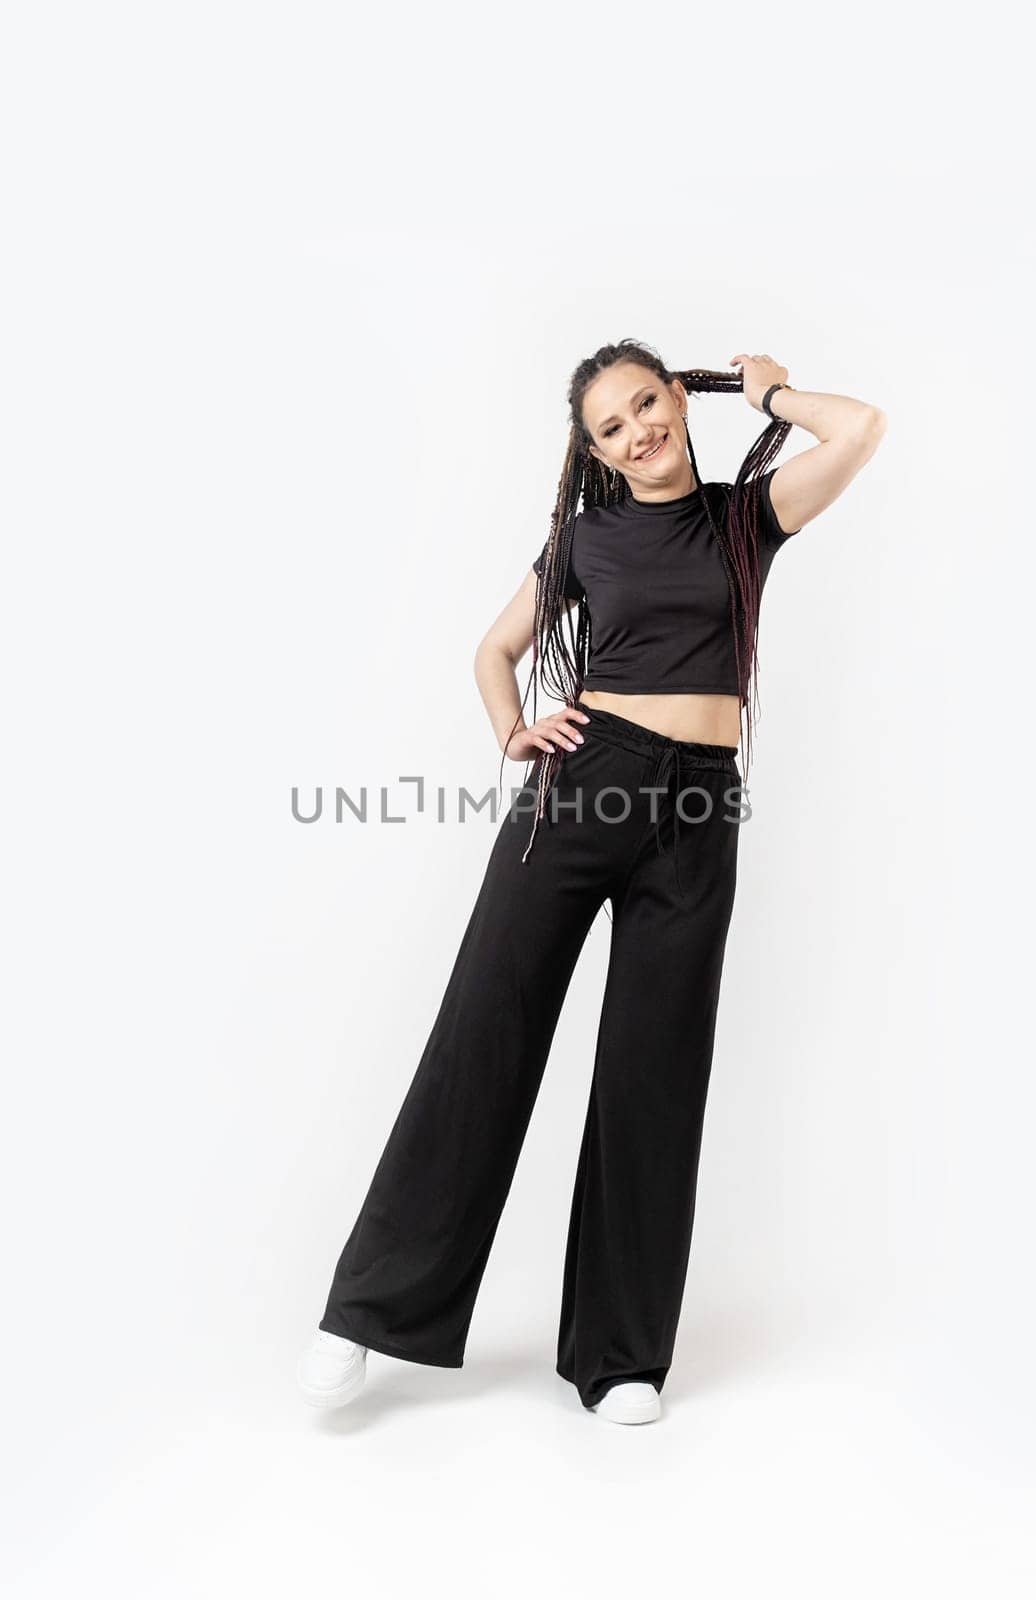 Fashionable young beautiful woman with dreadlocks posing on white background by Desperada